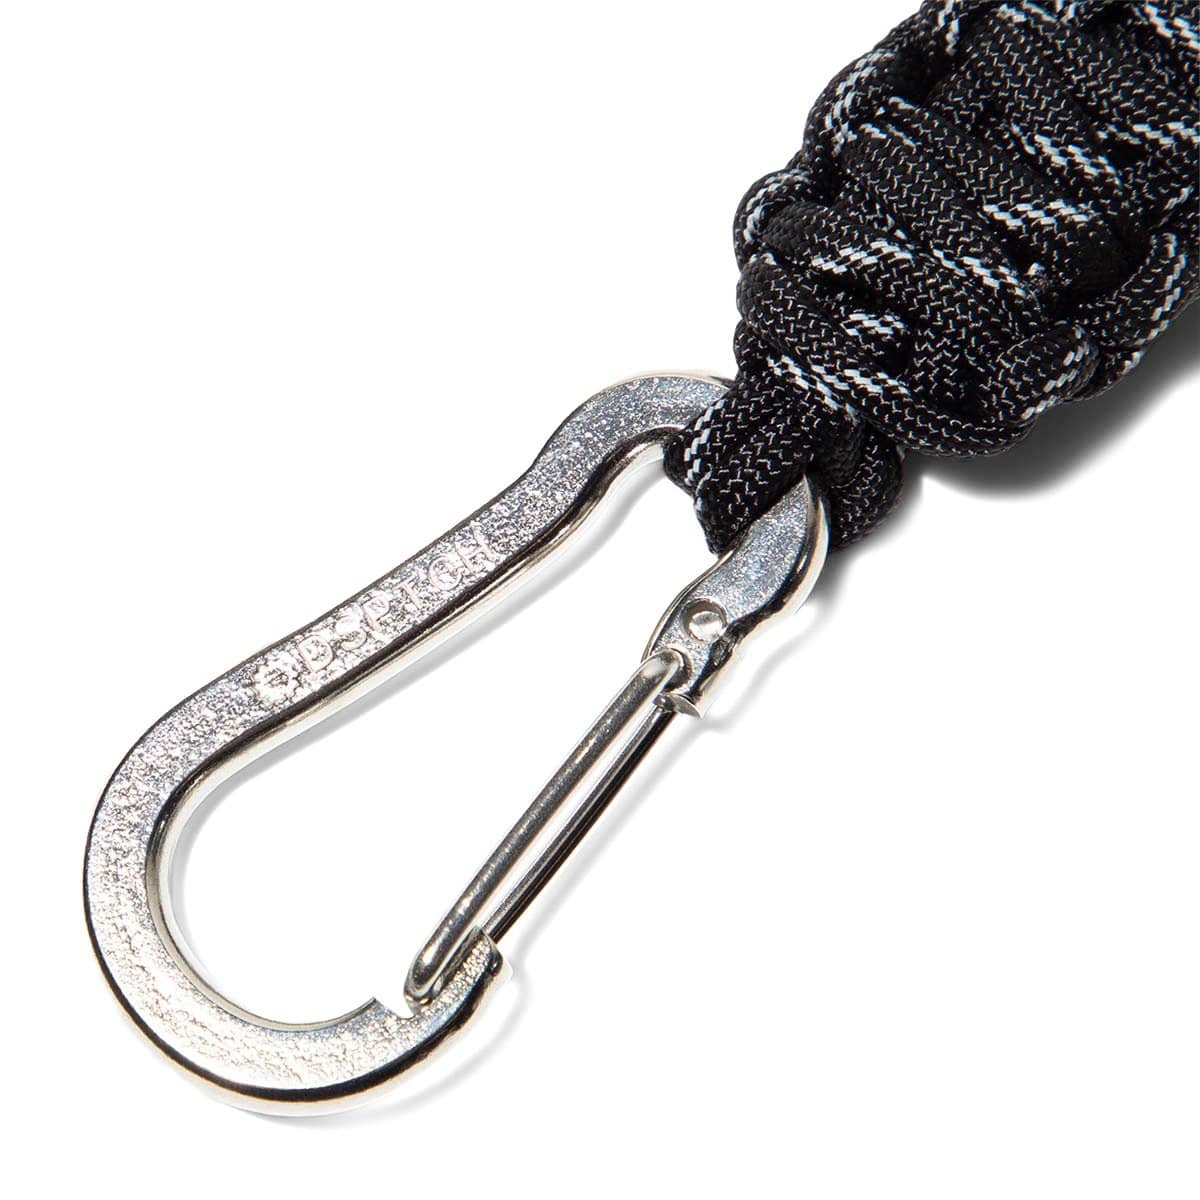 Stainless Steel Key Chains – Paracordclips LLC